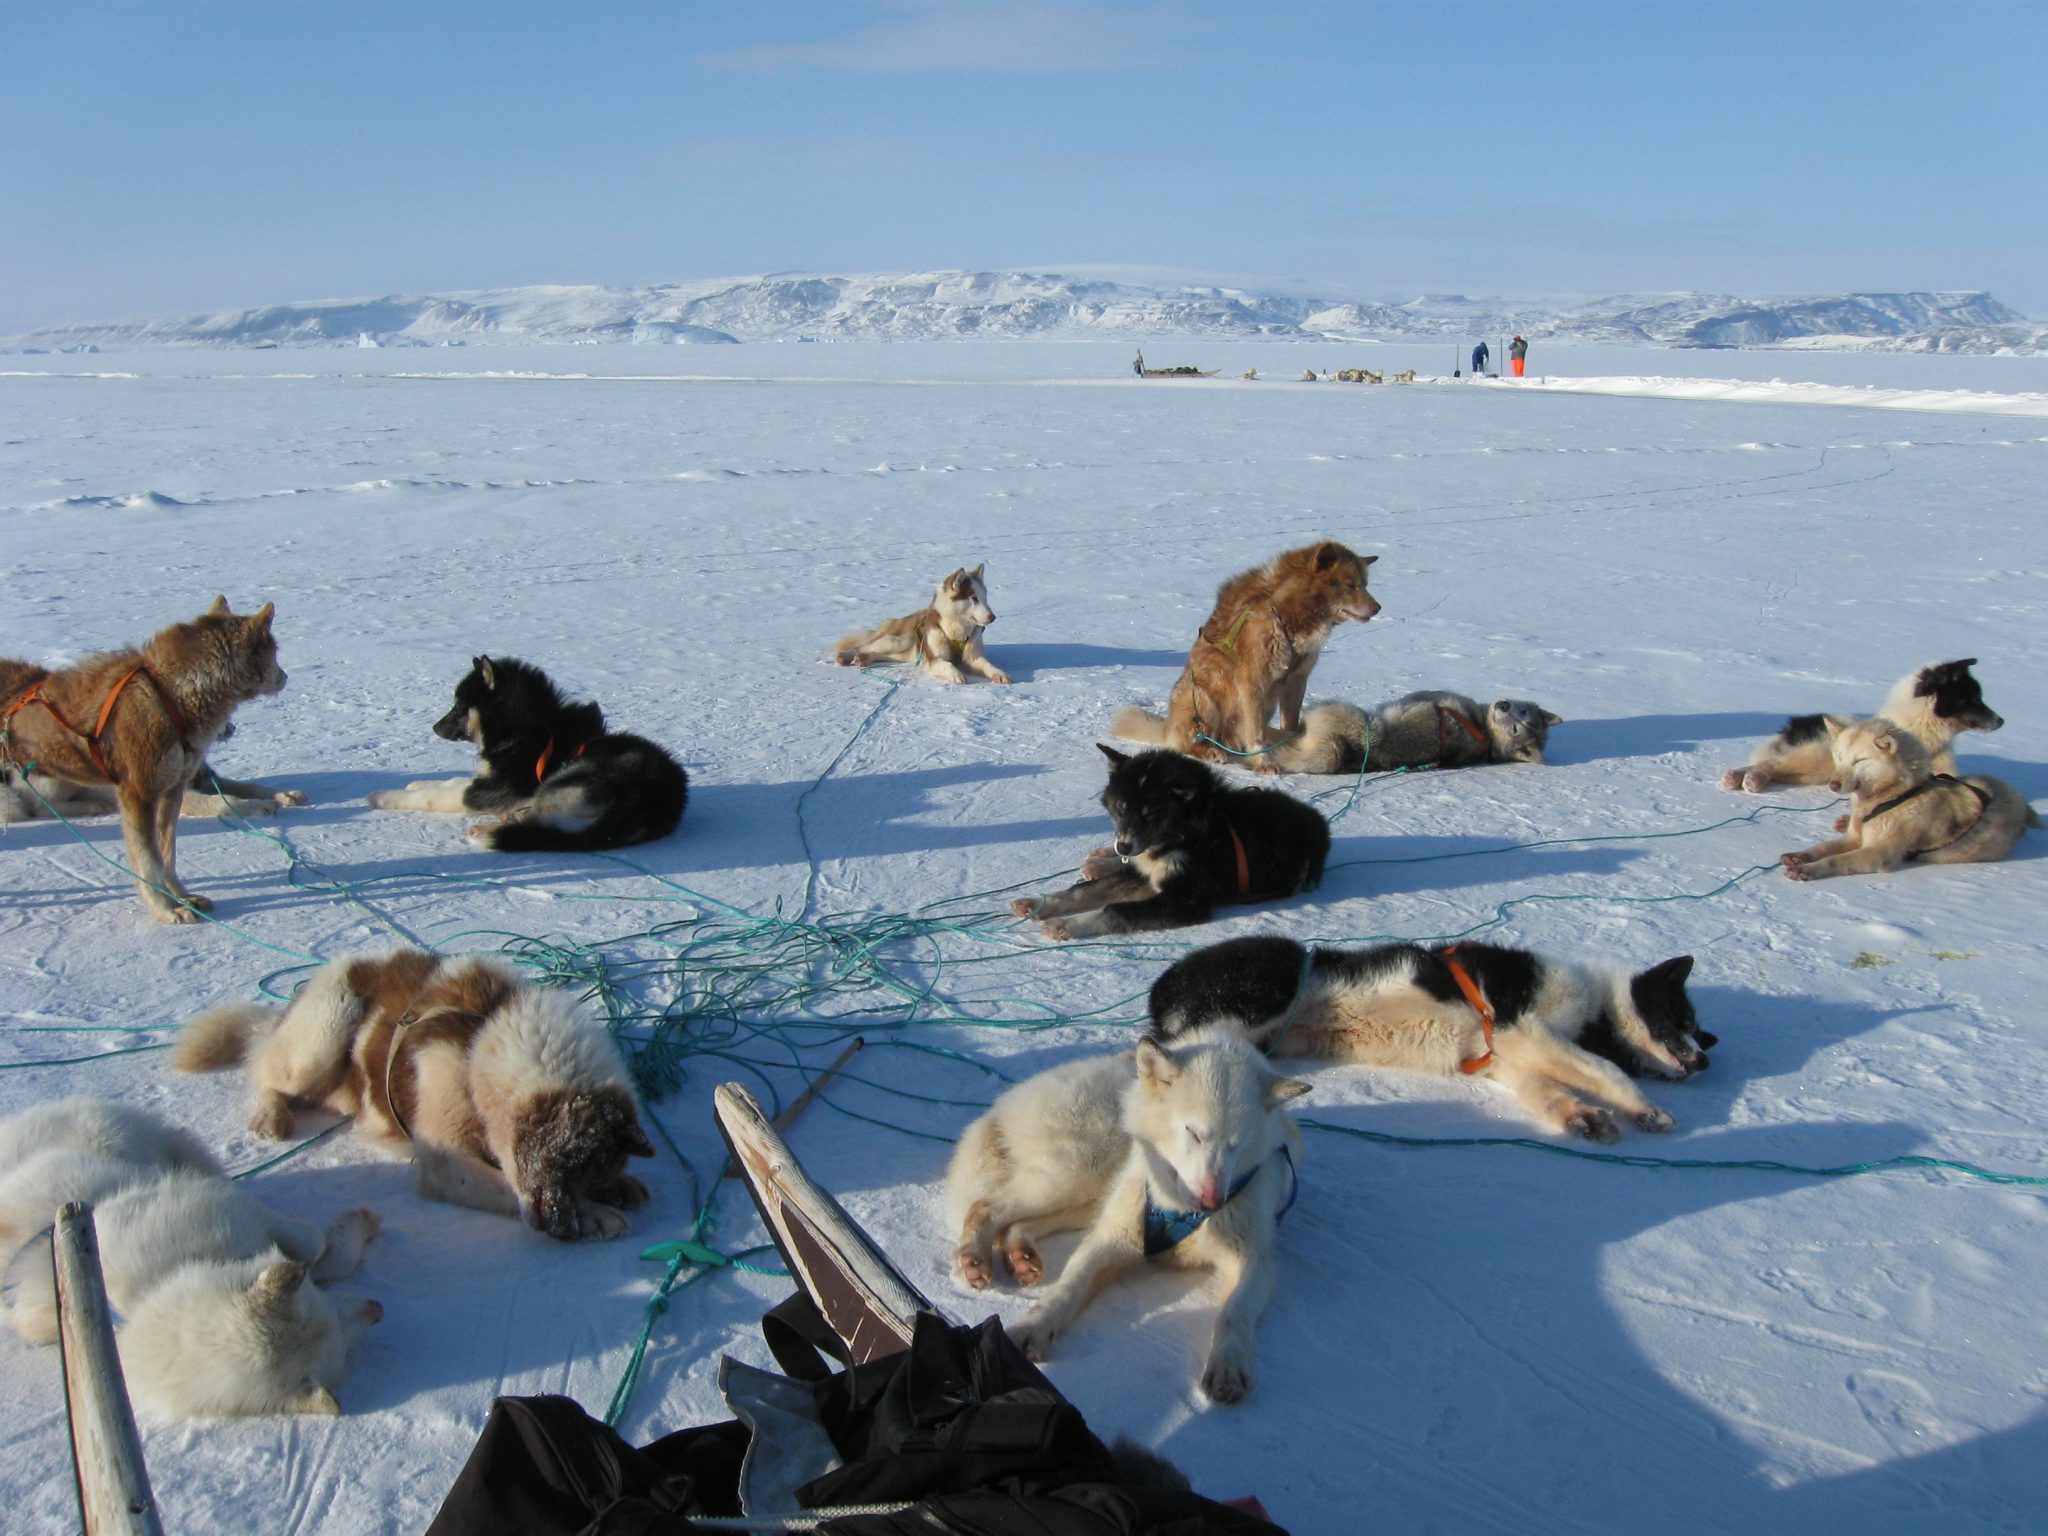 Sled dogs resting on frozen North Star Bay in Greenland